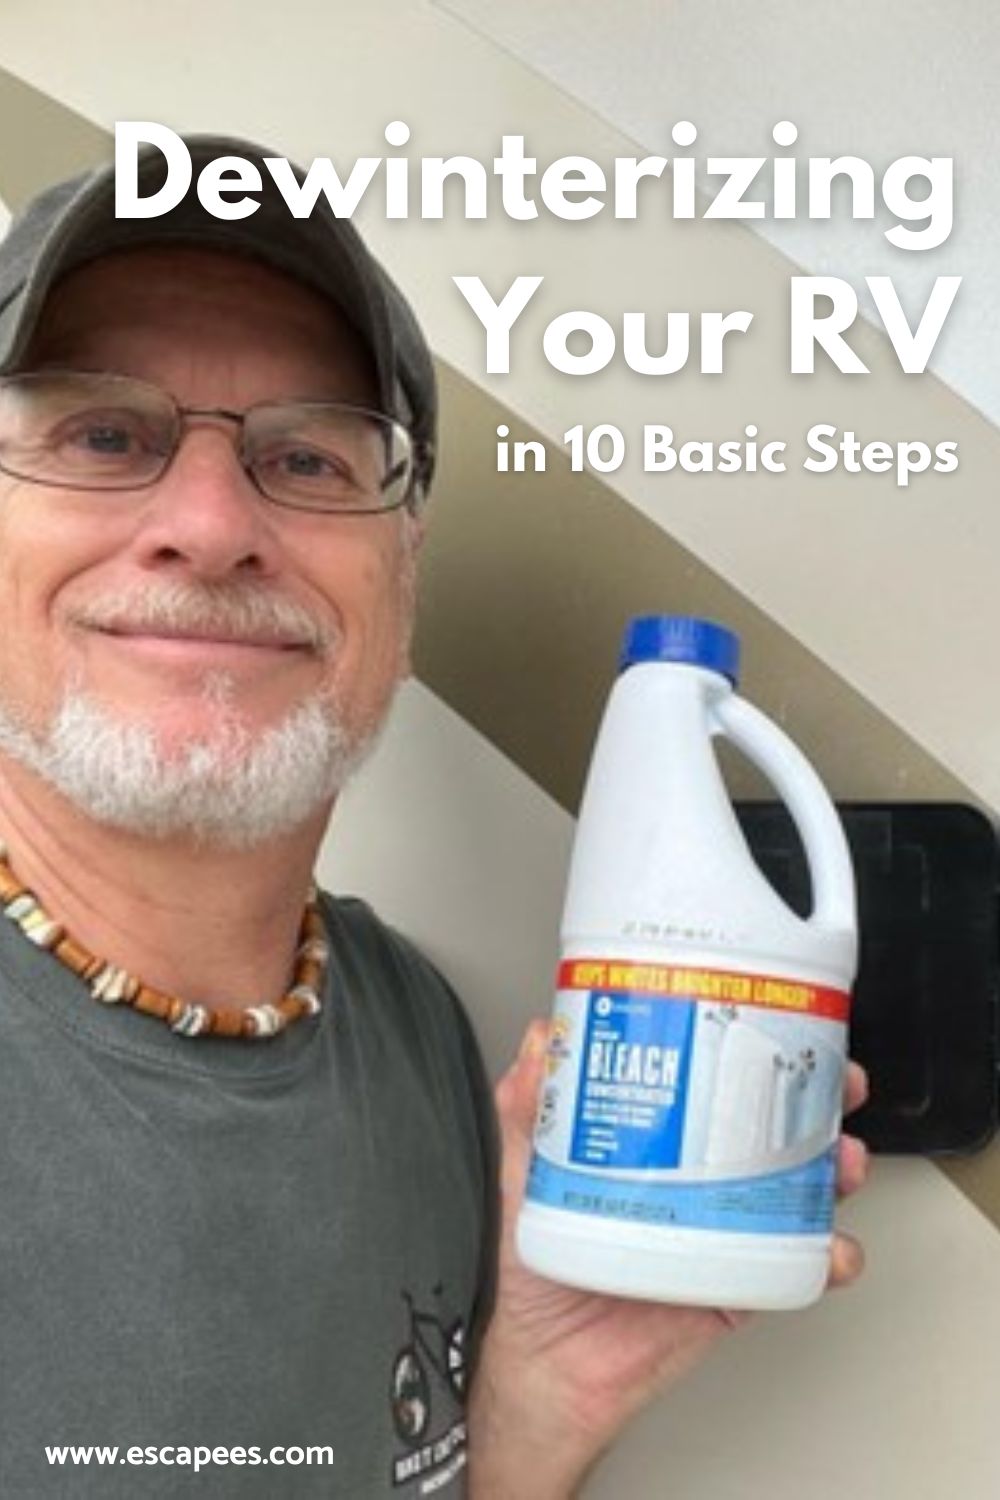 How To Dewinterize Your RV In 10 Basic Steps 17